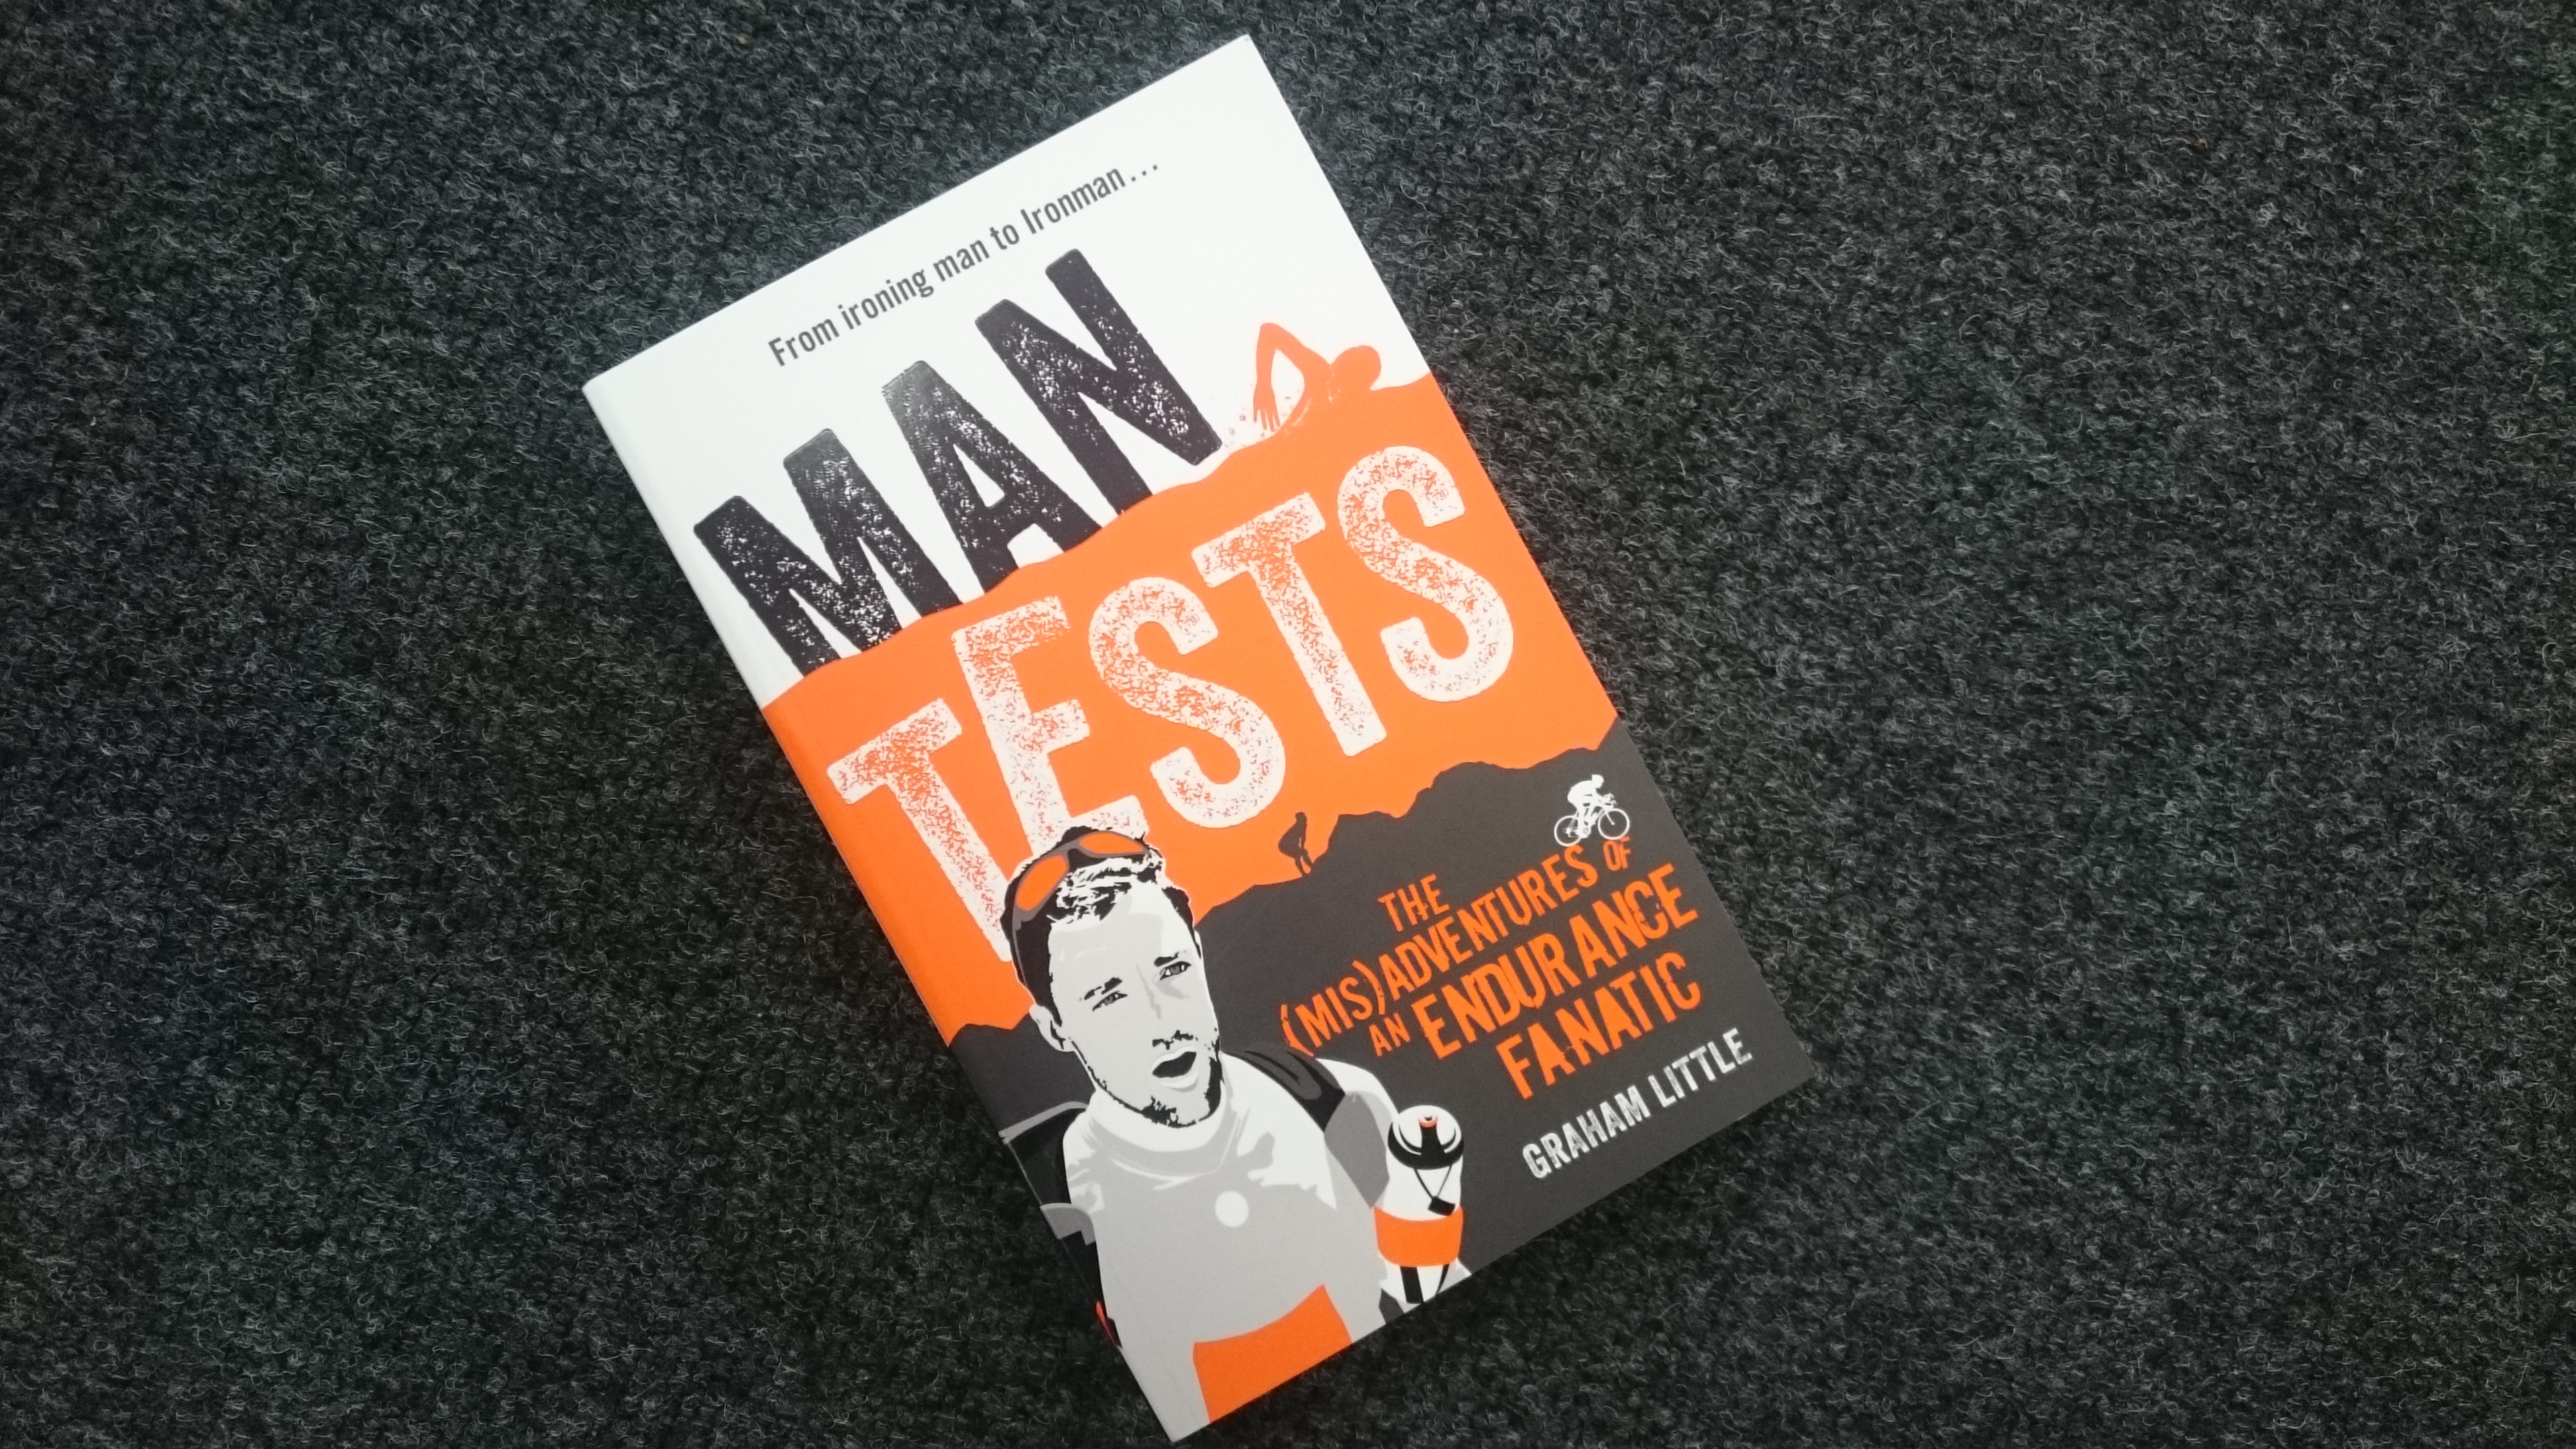 Fireside Reading: Man Tests by Graham Little